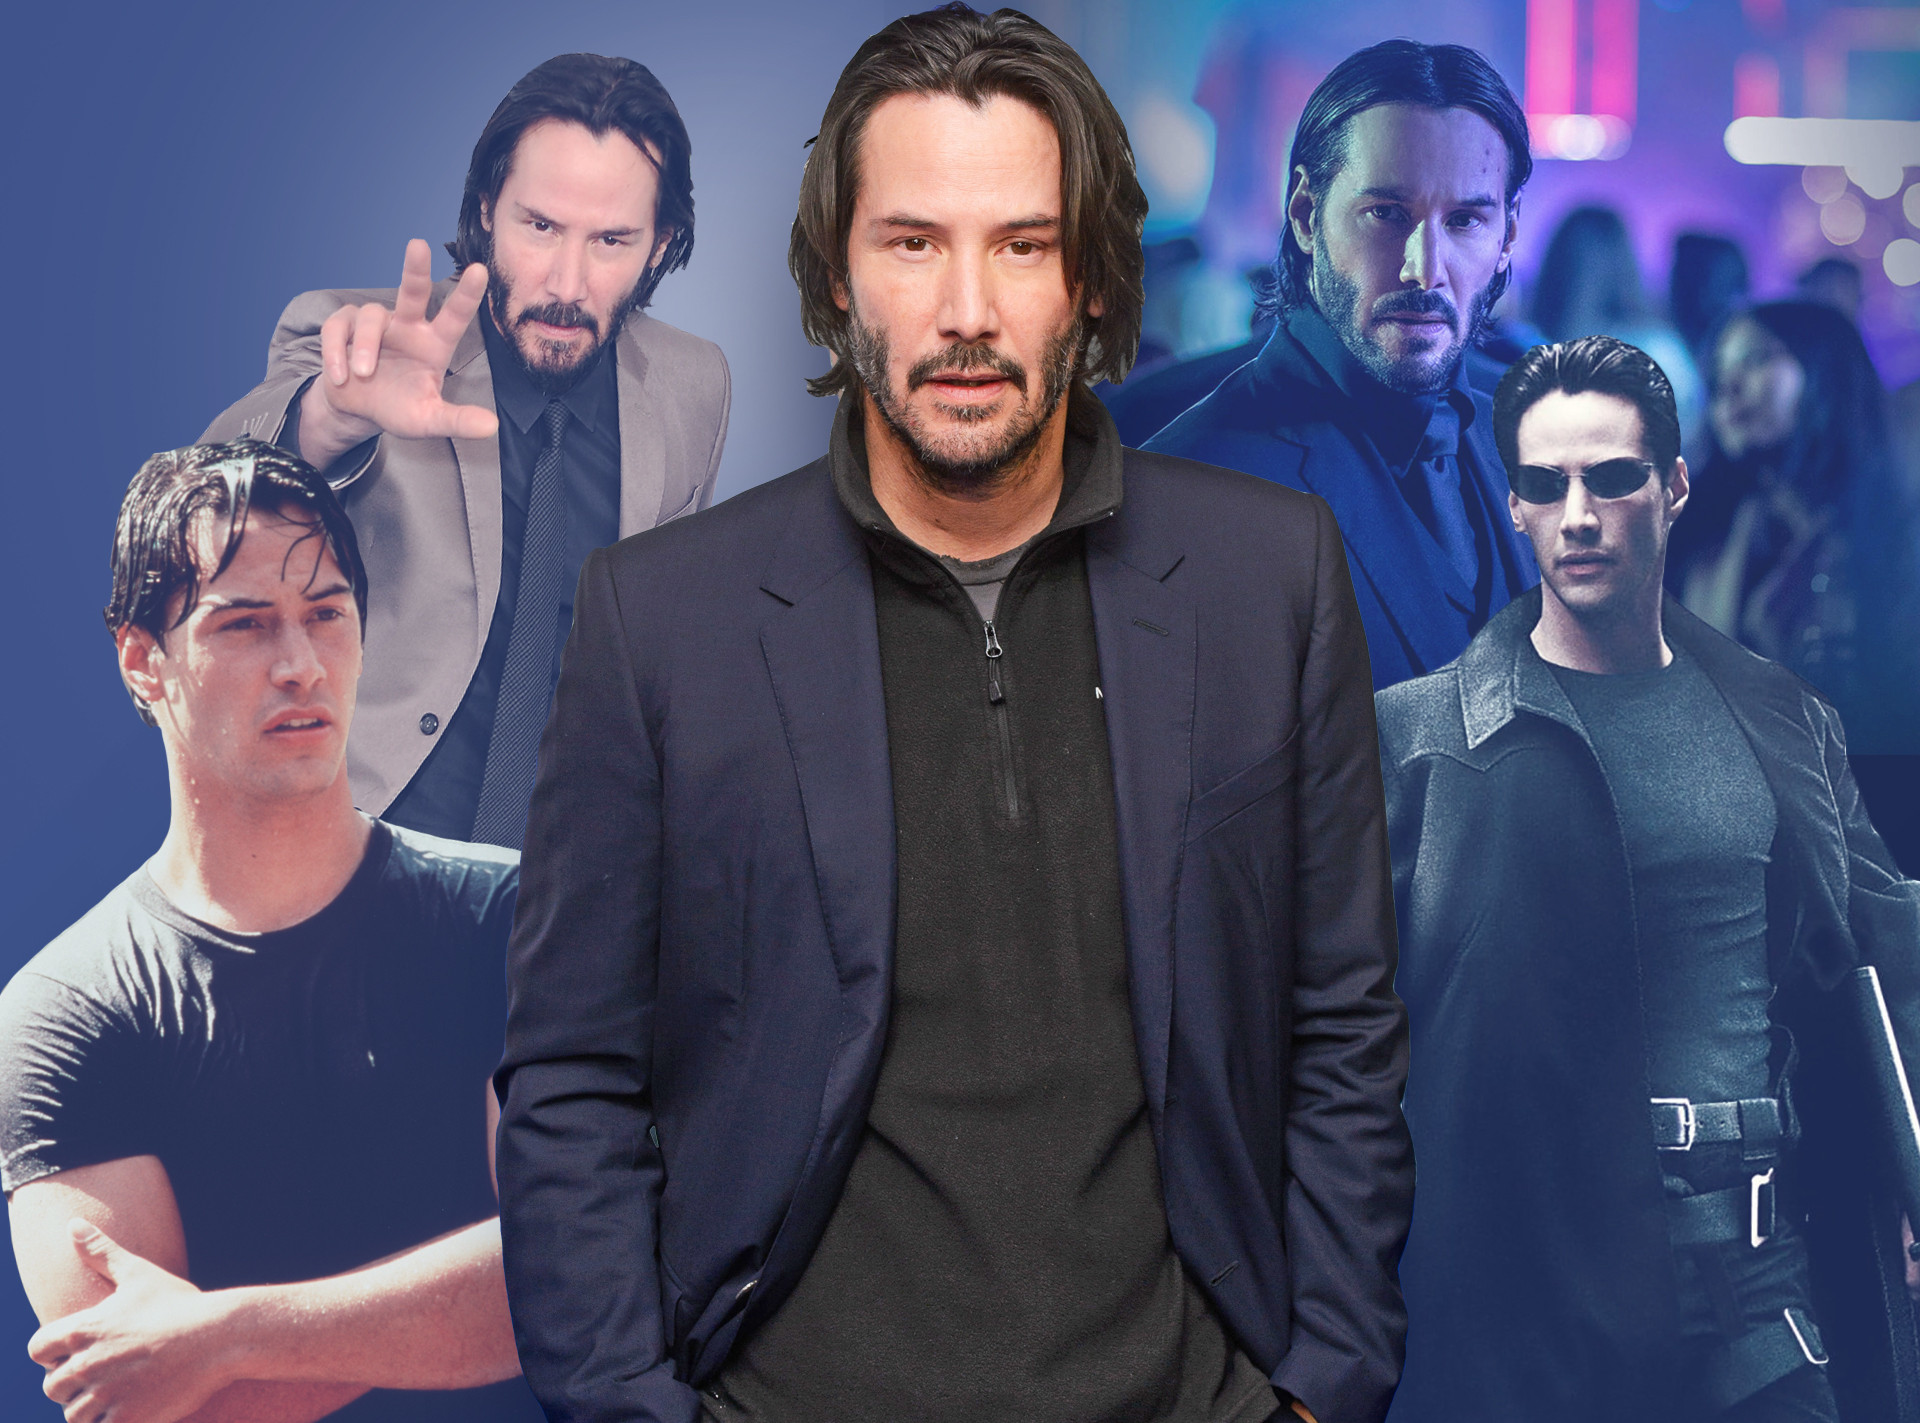 rs_1920x1423-190515180154-1024-Keanu-Reeves-Feature-mh-051519.jpg?fit=around%7C1920:1423&output-quality=90&crop=1920:1423;center,top